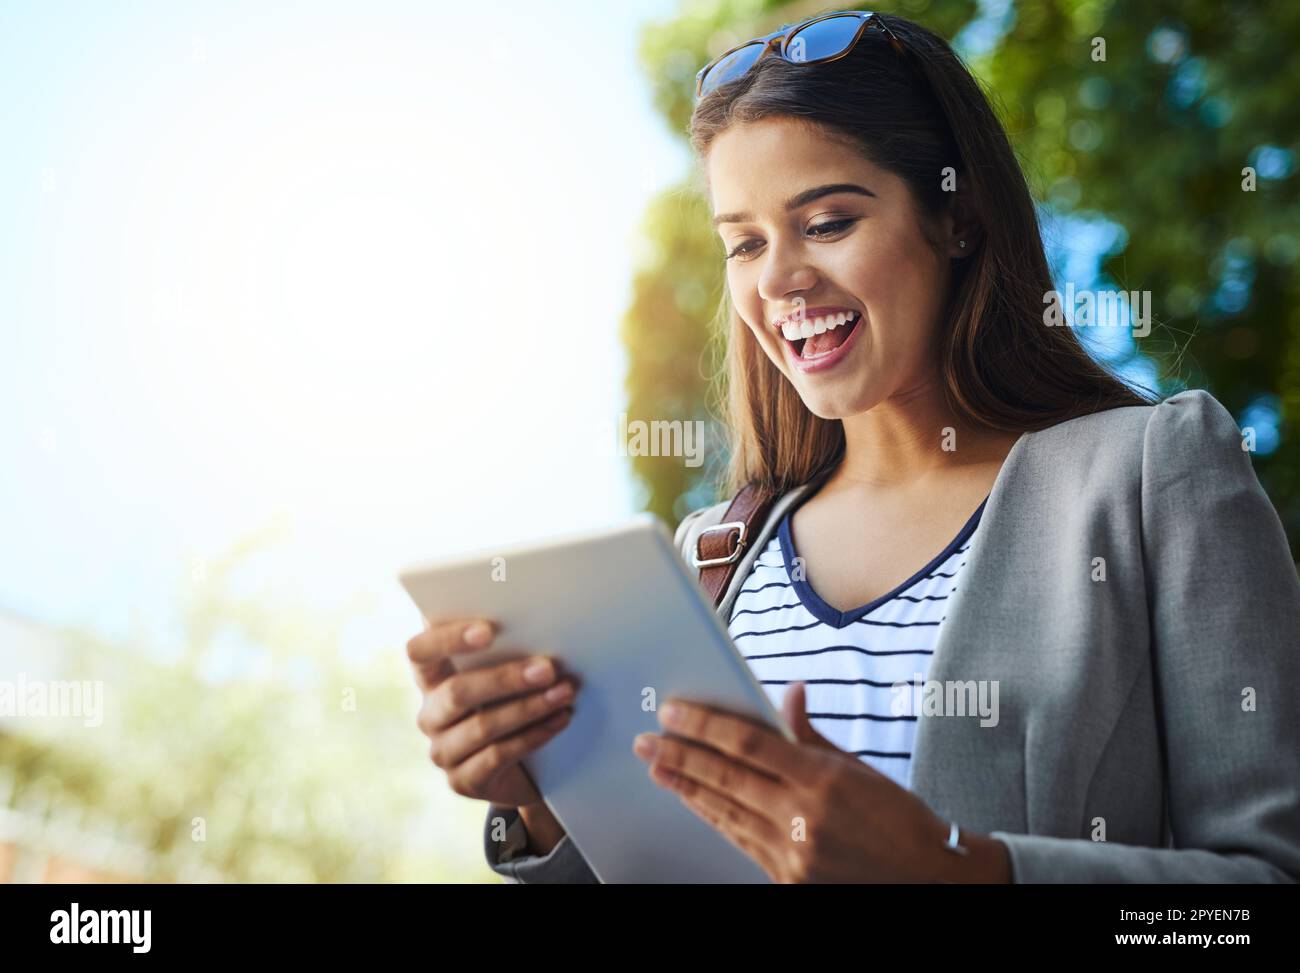 She doesnt need an office to do business. an attractive young woman using her tablet while commuting to work. Stock Photo